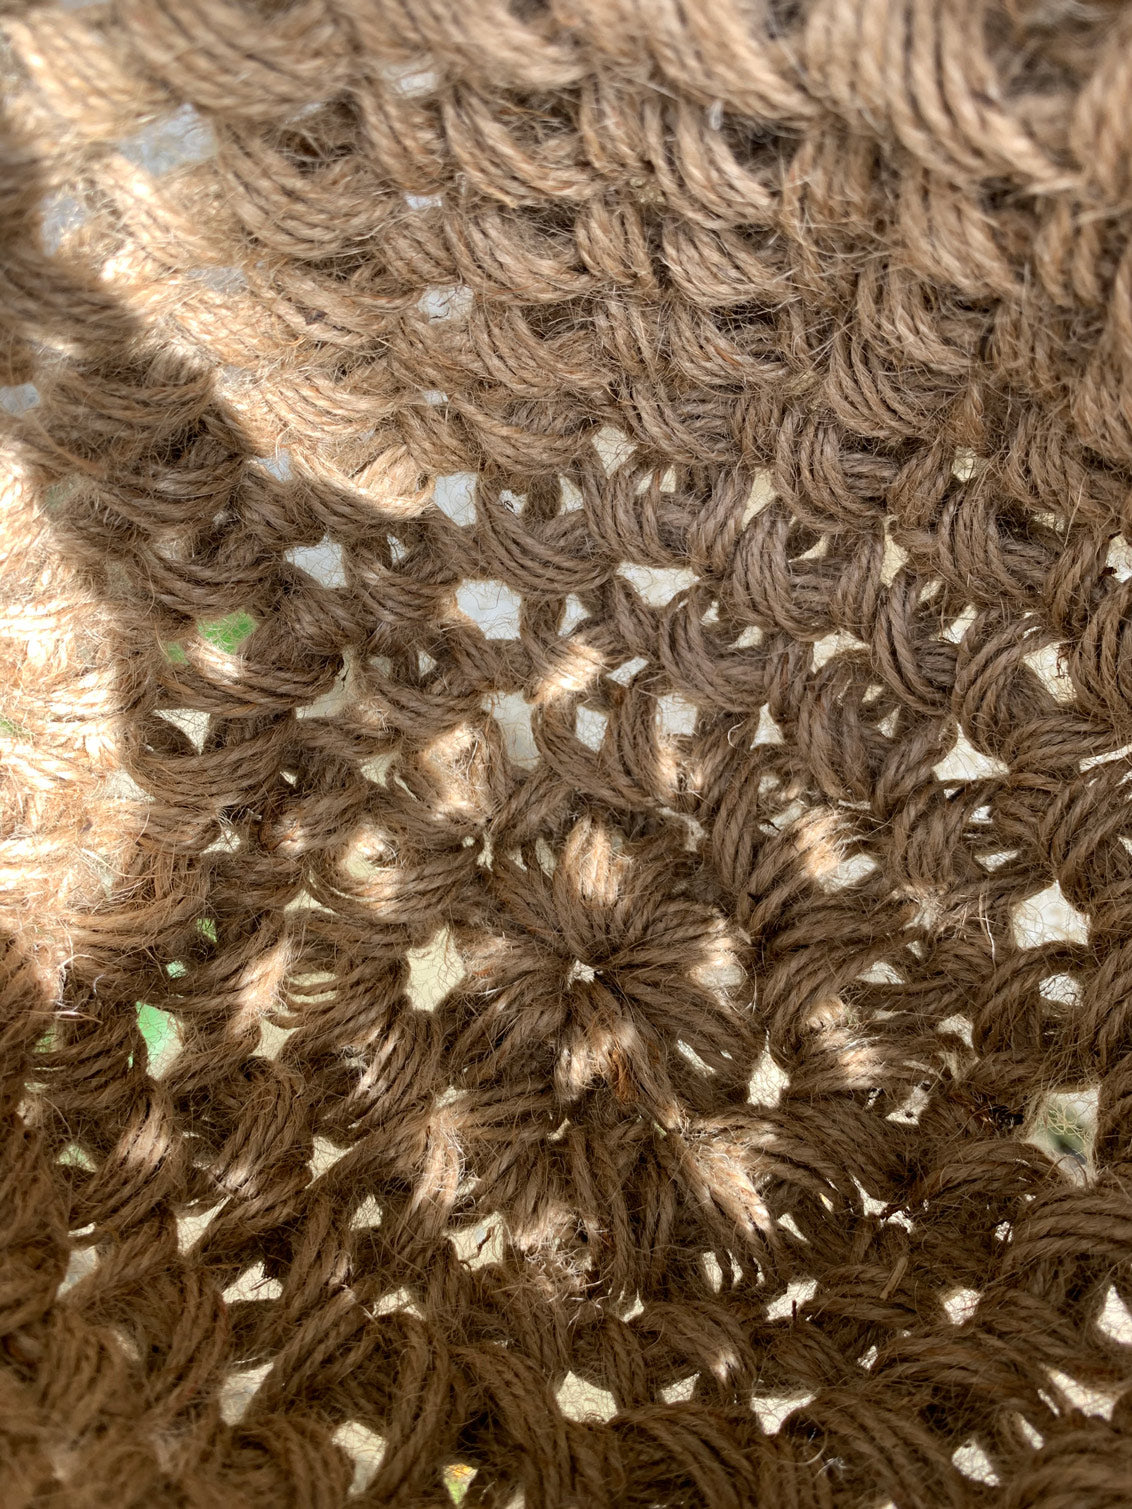 Close up photograph of the interior jute hanging basket, without pot or plant. Photo shows the pot like shape of the handmade crocheted basket and the woven texture of the fibres. Also shows how the basket is constructed, in the round.